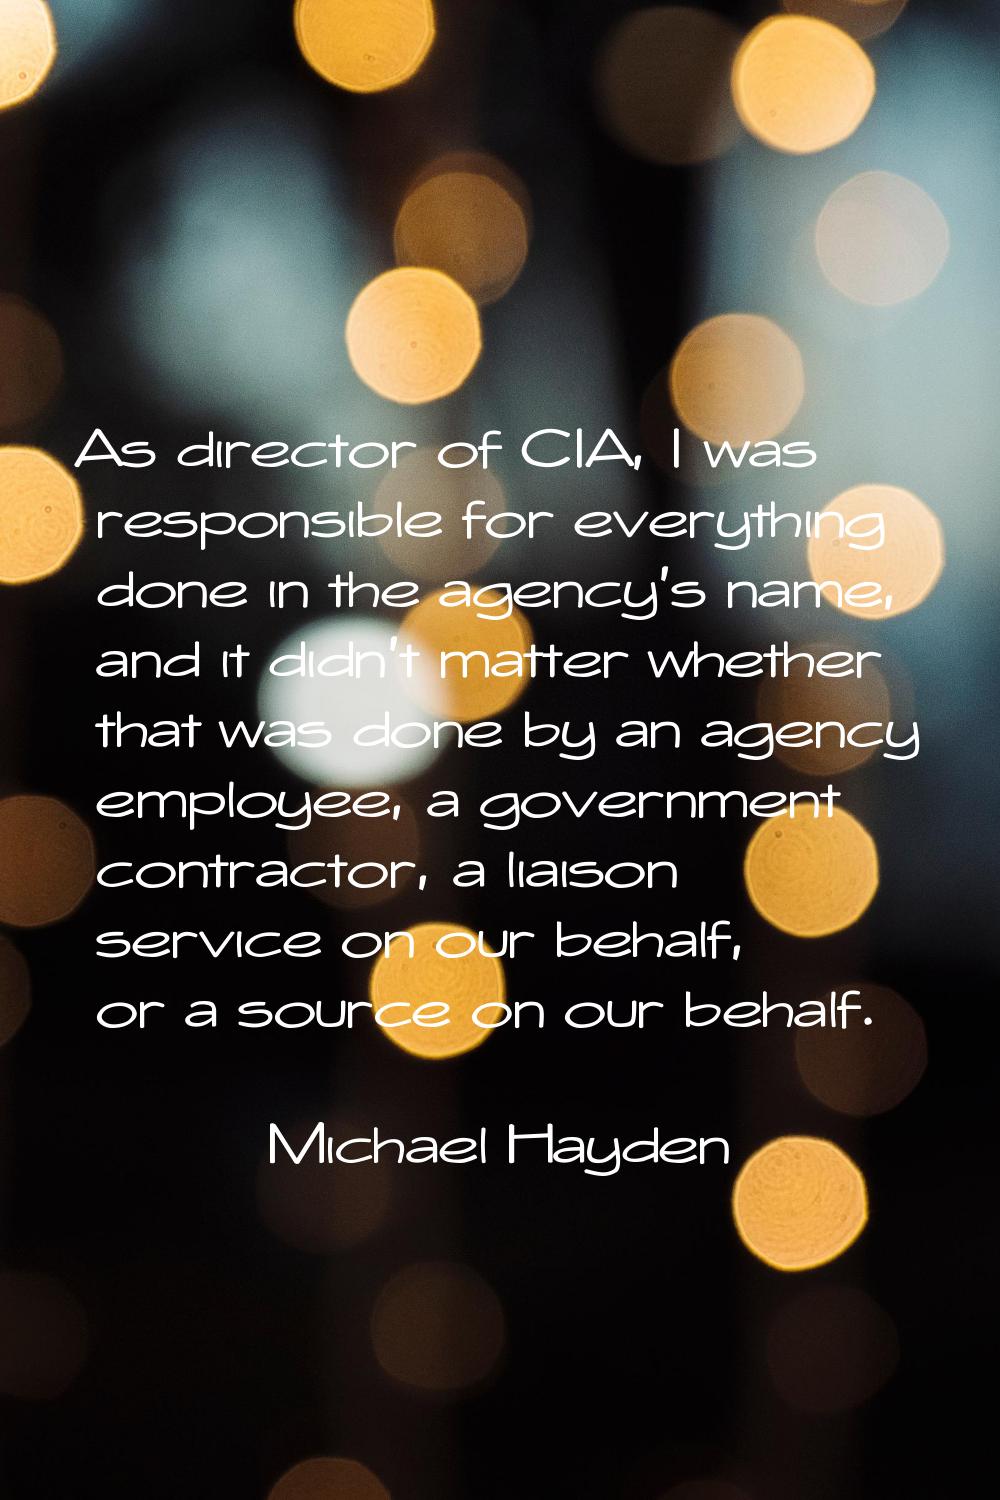 As director of CIA, I was responsible for everything done in the agency's name, and it didn't matte